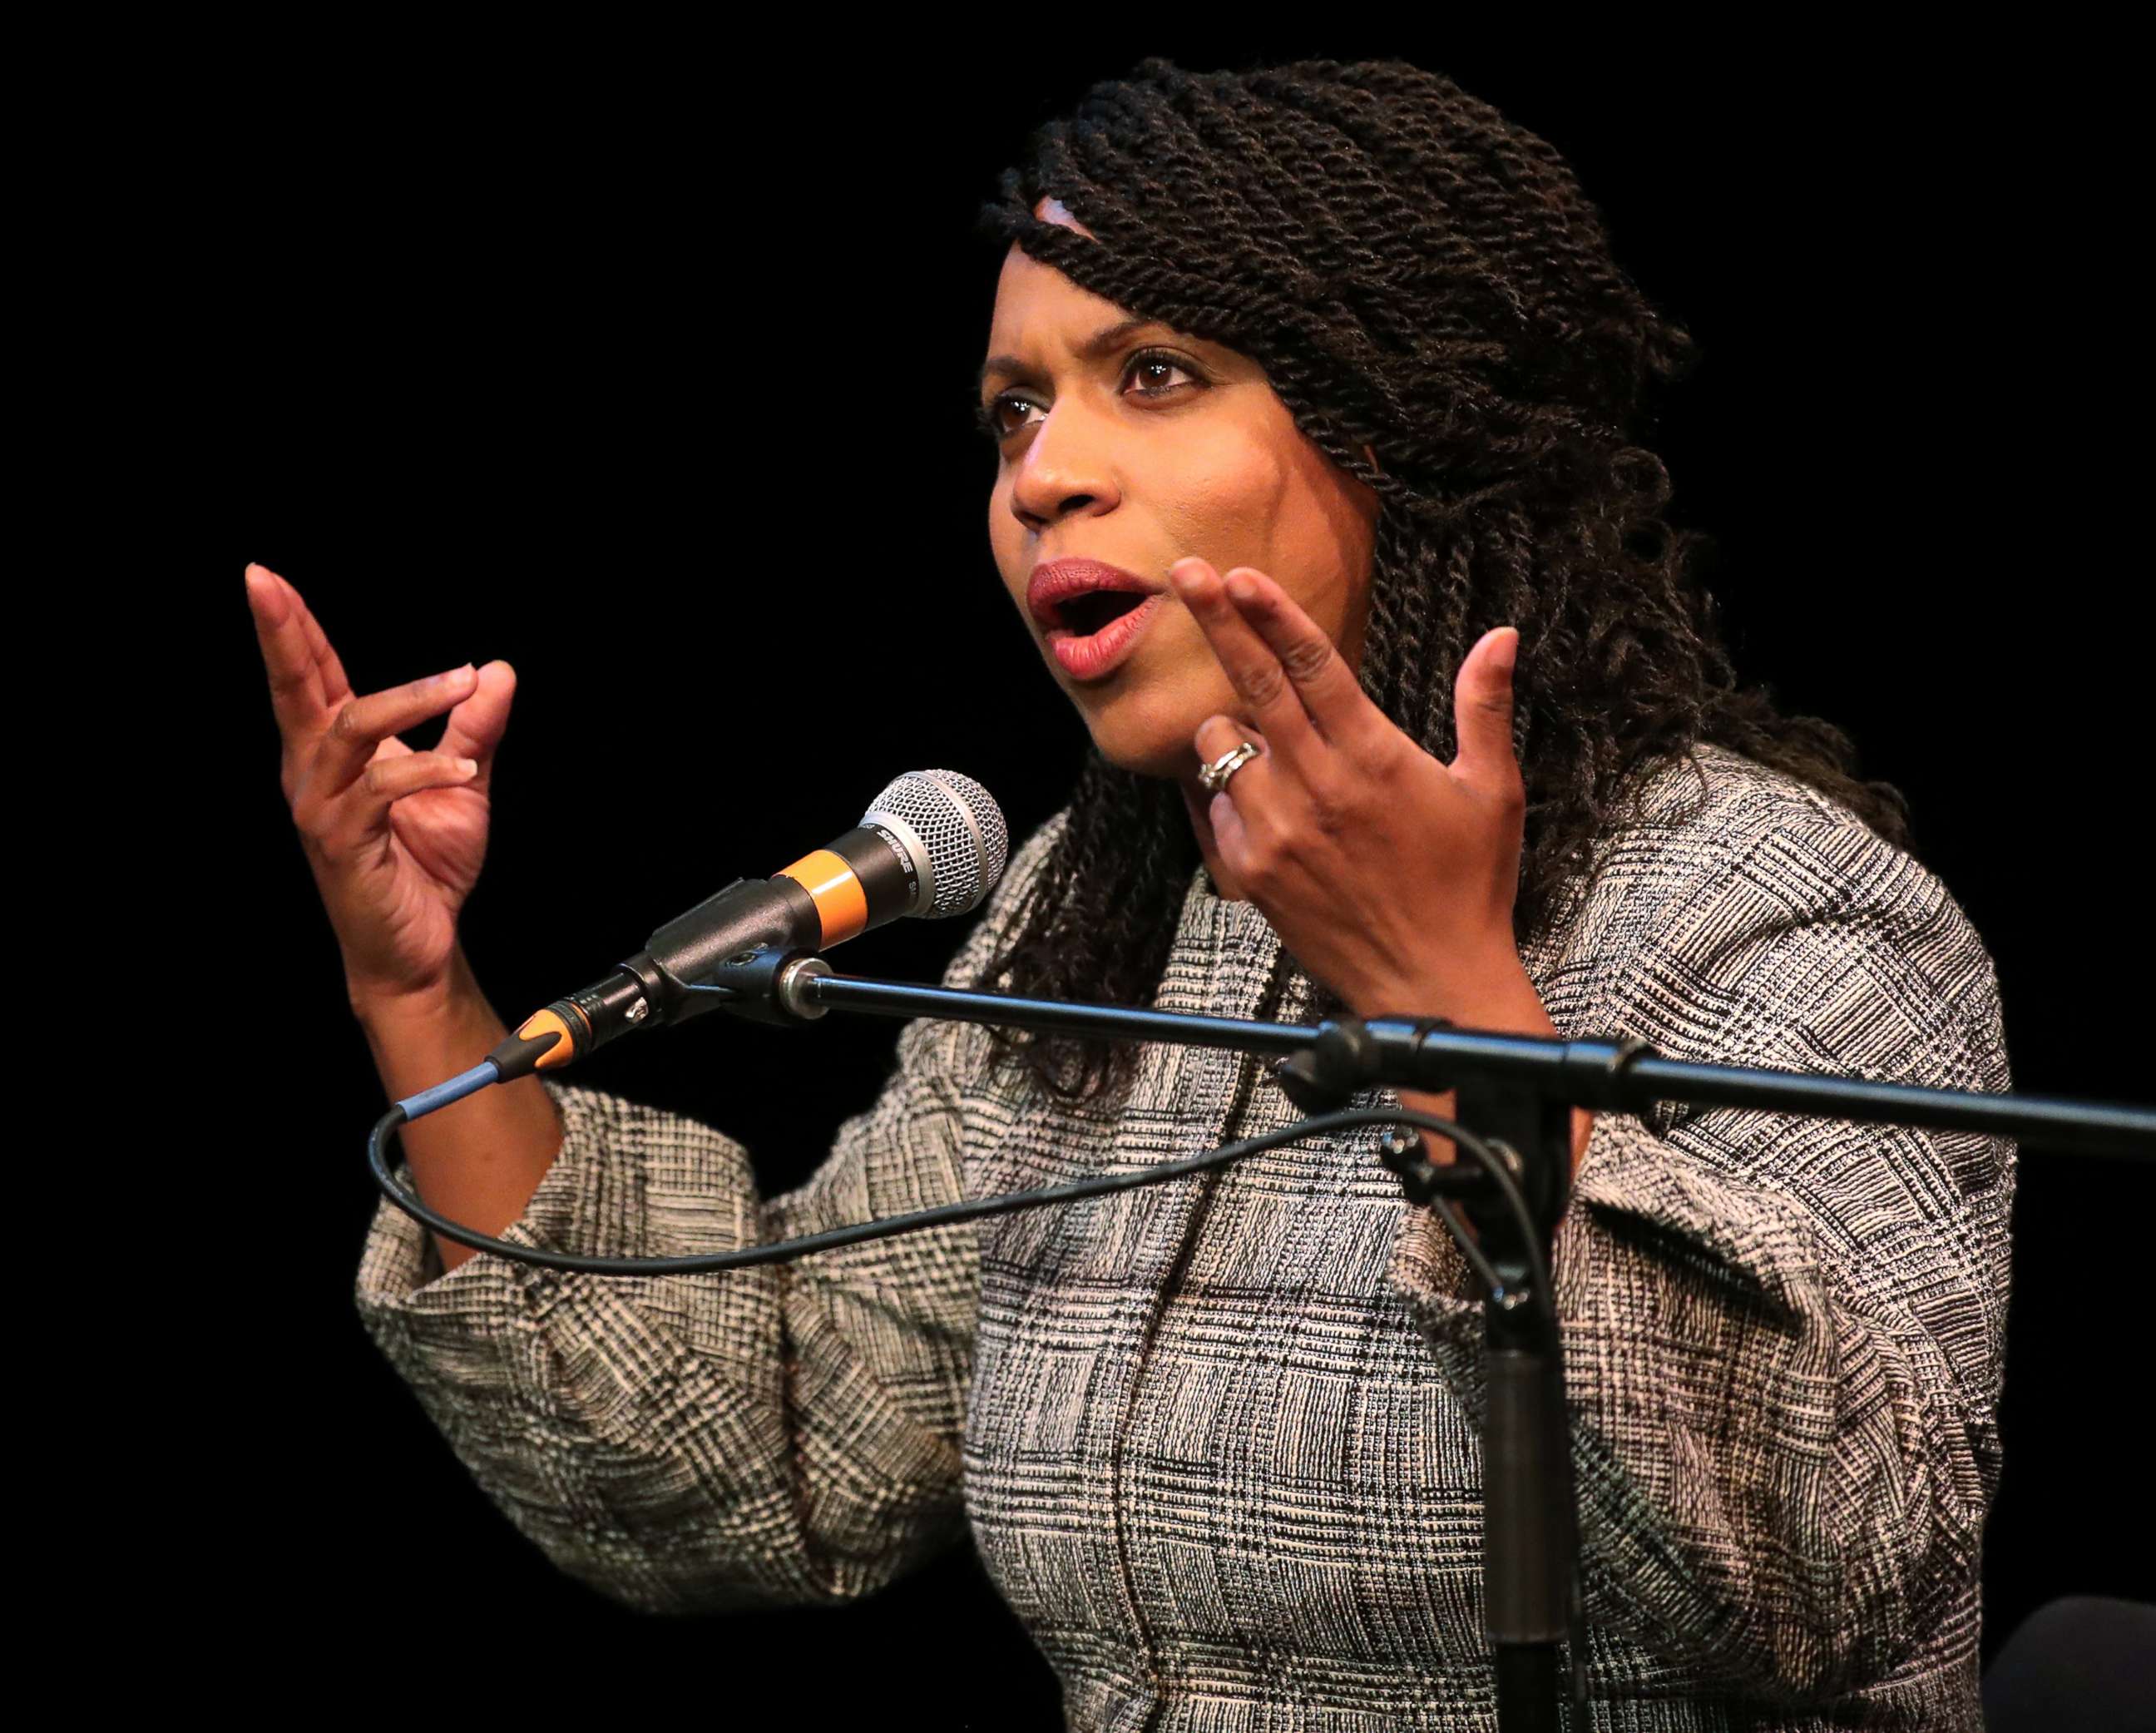 PHOTO: Boston City Councilor Ayanna Pressley speaks at a congressional forum at Emerson College in Boston on April 3, 2018.